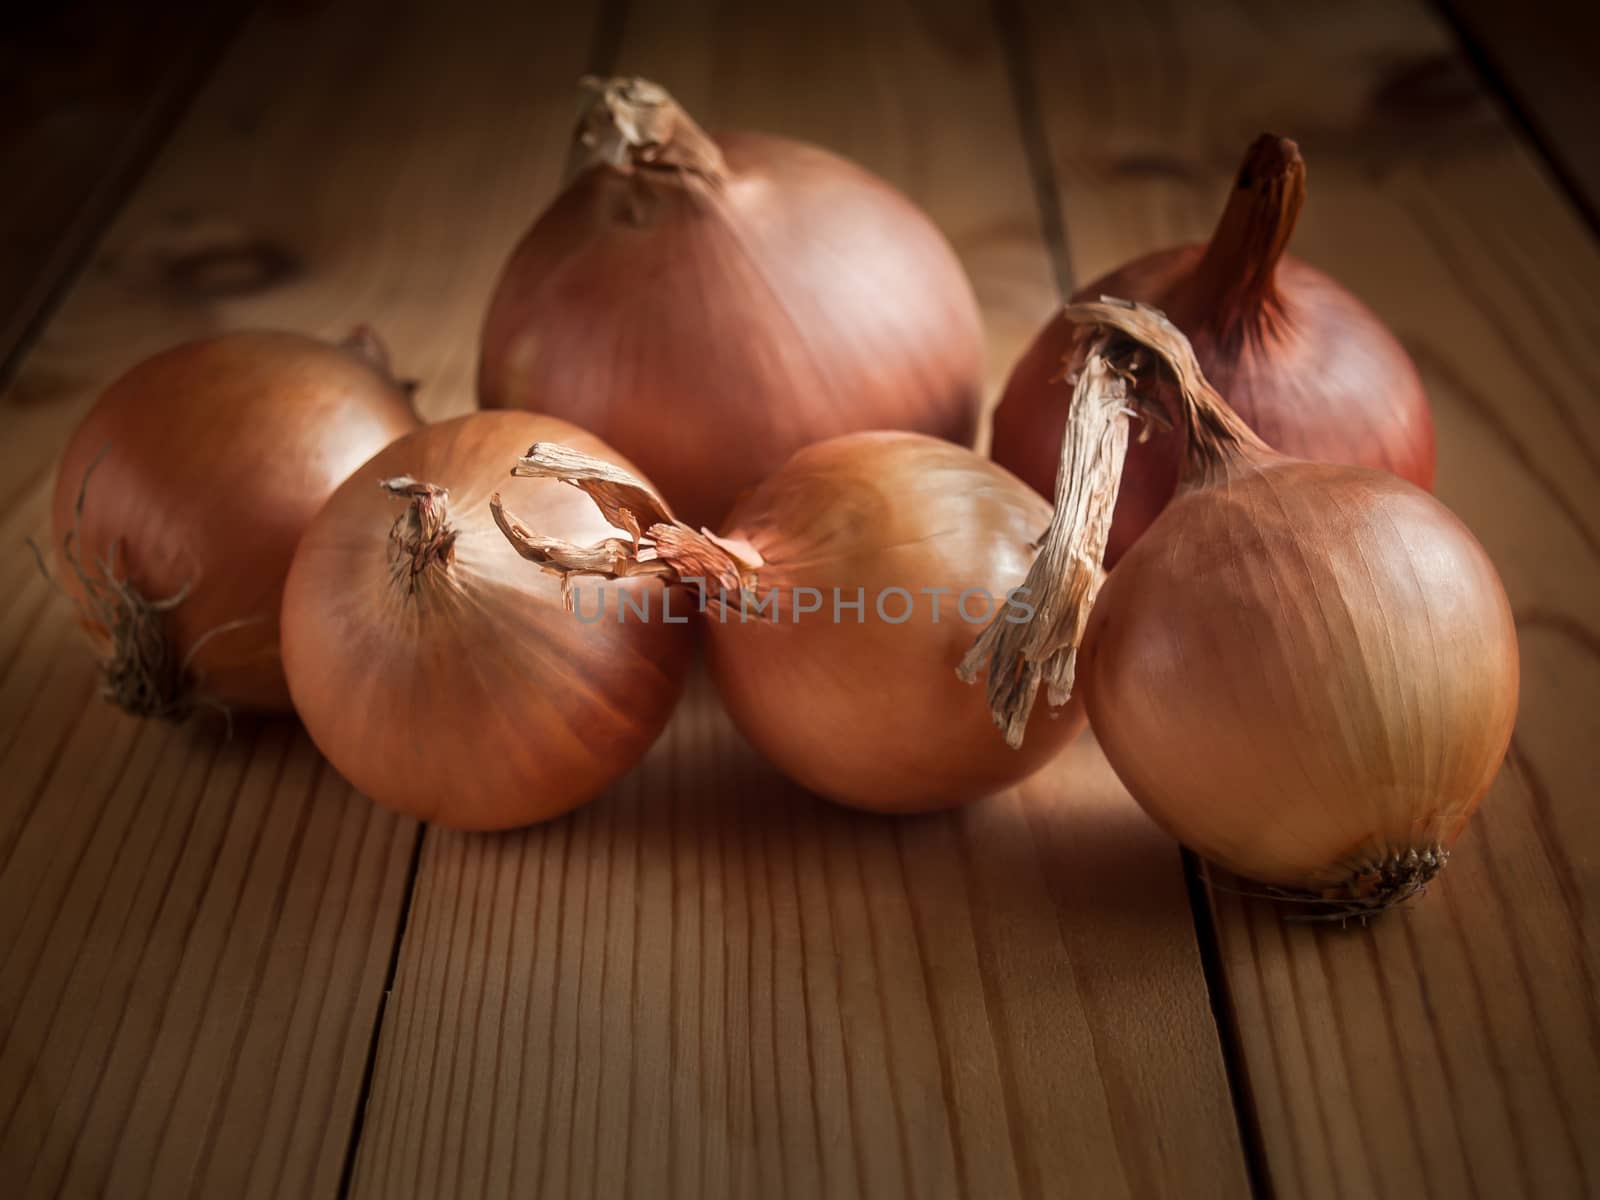 Onions lying on a wooden table in the background